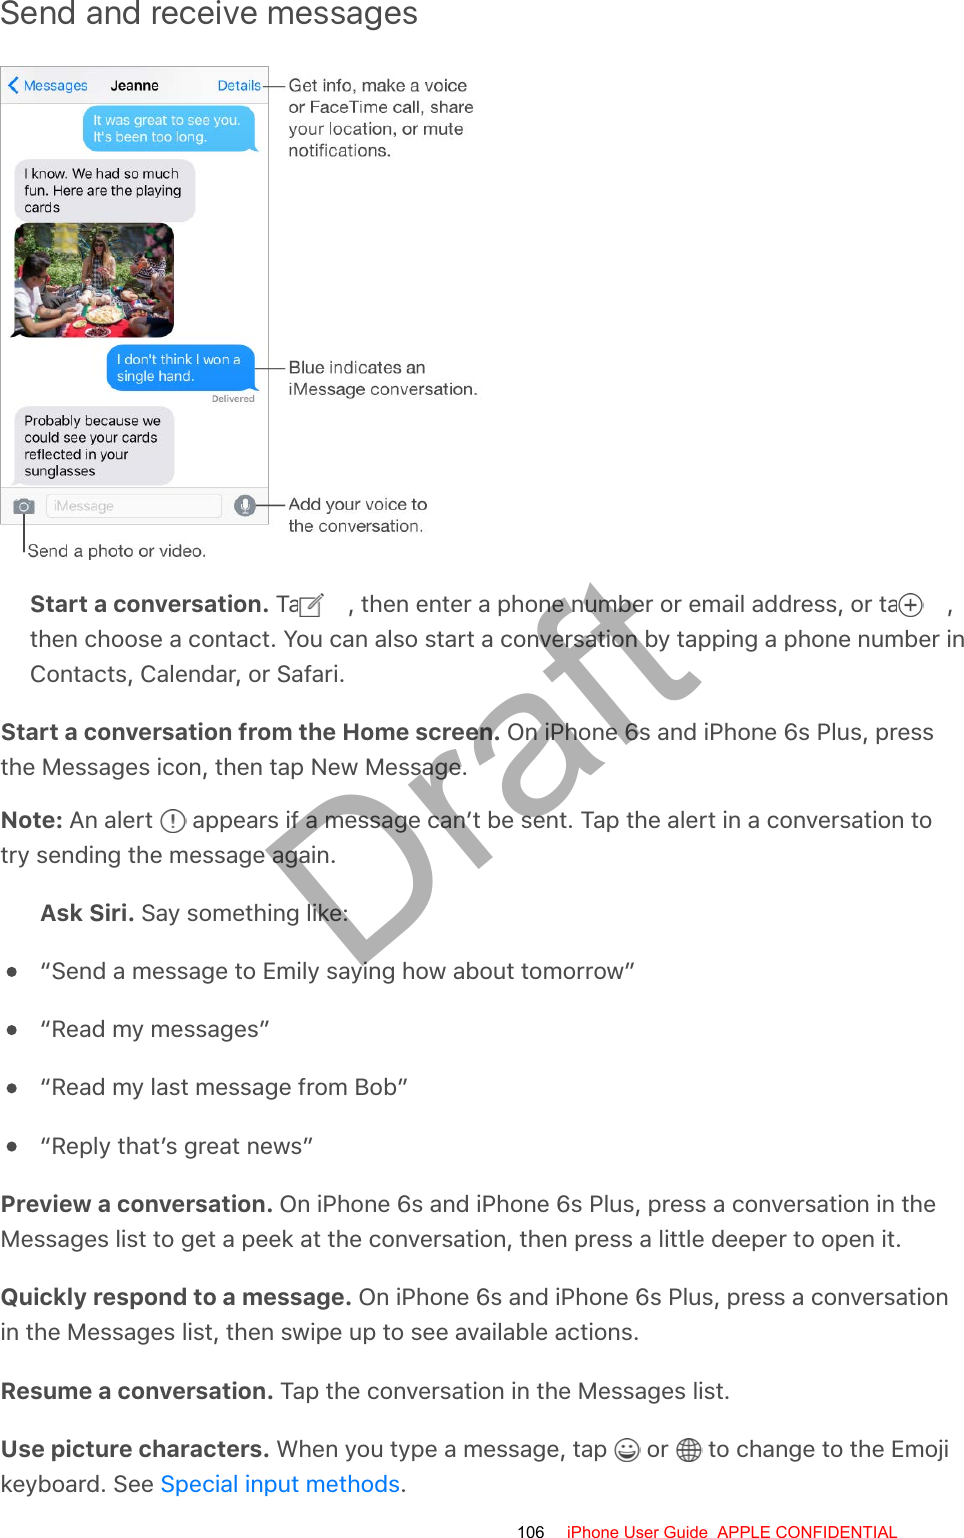 Send and receive messagesStart a conversation. Tap  , then enter a phone number or email address, or tap  ,then choose a contact. You can also start a conversation by tapping a phone number inContacts, Calendar, or Safari.Start a conversation from the Home screen. On iPhone 6s and iPhone 6s Plus, pressthe Messages icon, then tap New Message.Note: An alert   appears if a message can’t be sent. Tap the alert in a conversation totry sending the message again.Ask Siri. Say something like:“Send a message to Emily saying how about tomorrow”“Read my messages”“Read my last message from Bob”“Reply that’s great news”Preview a conversation. On iPhone 6s and iPhone 6s Plus, press a conversation in theMessages list to get a peek at the conversation, then press a little deeper to open it.Quickly respond to a message. On iPhone 6s and iPhone 6s Plus, press a conversationin the Messages list, then swipe up to see available actions.Resume a conversation. Tap the conversation in the Messages list.Use picture characters. When you type a message, tap   or   to change to the Emojikeyboard. See  .Special input methods106 iPhone User Guide  APPLE CONFIDENTIALDraft